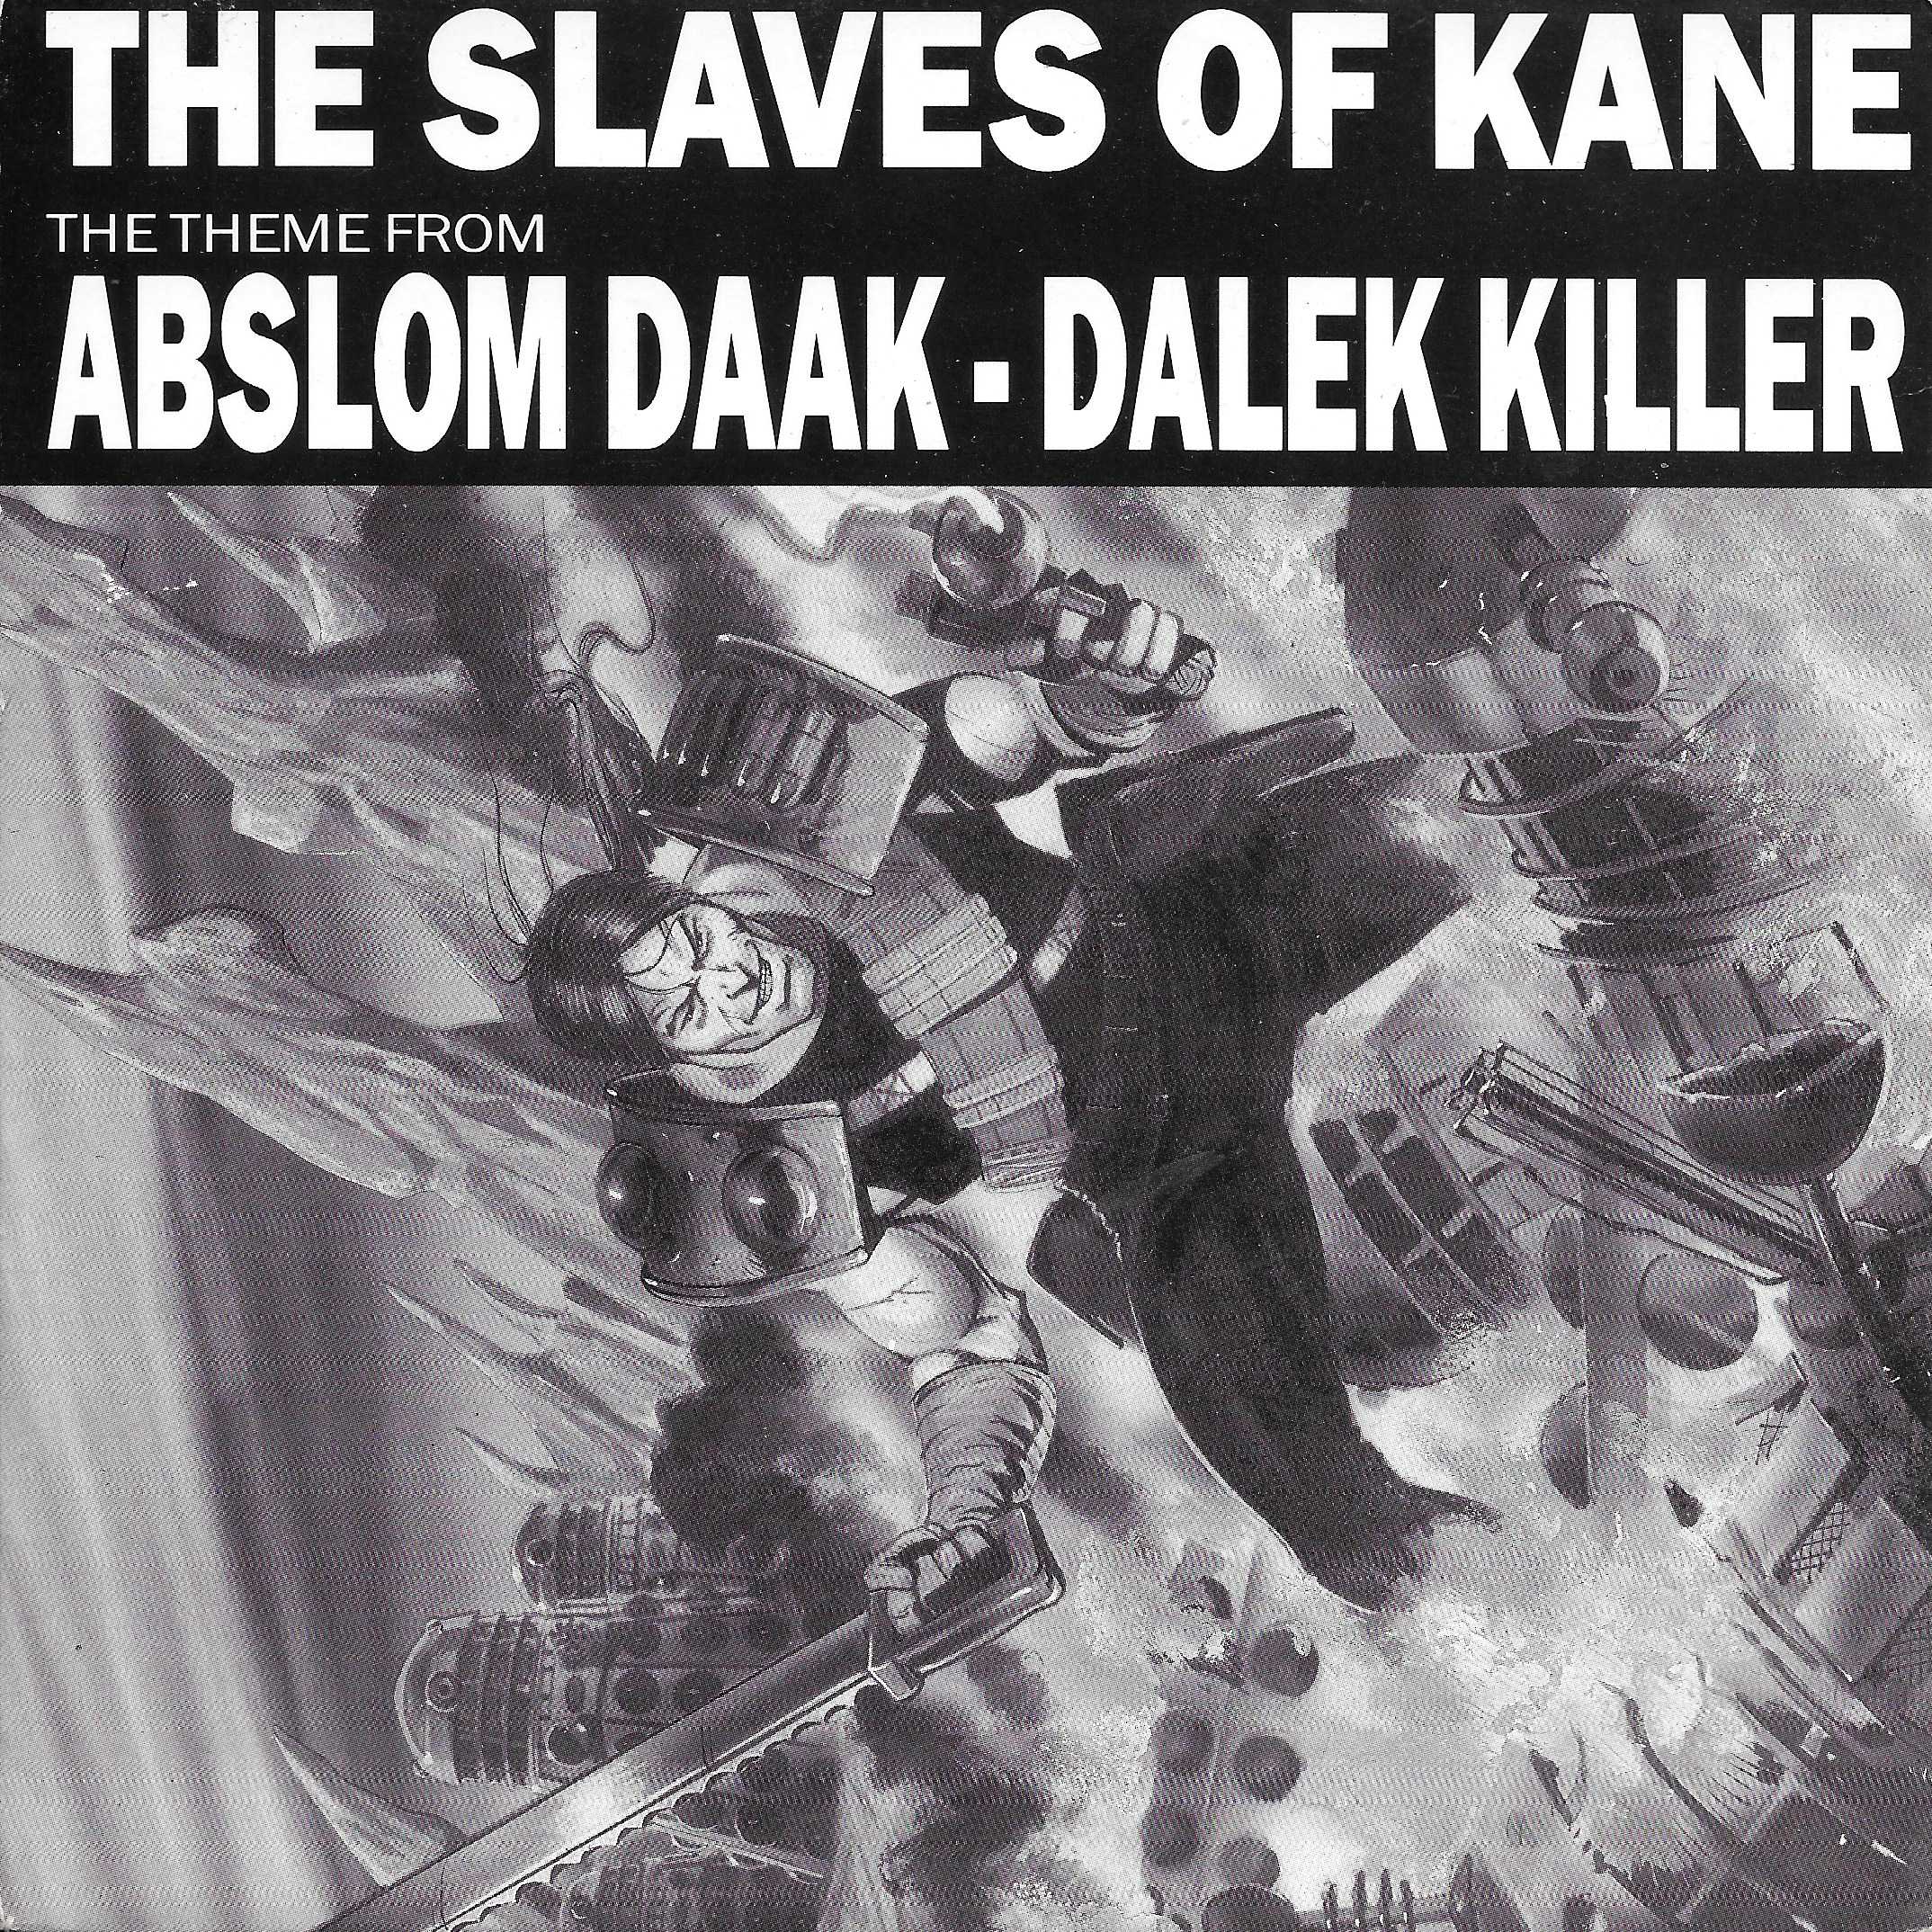 Picture of The slaves of Kane (Abslom Daak - Dalek killer) by artist Dominic Glynn from the BBC singles - Records and Tapes library